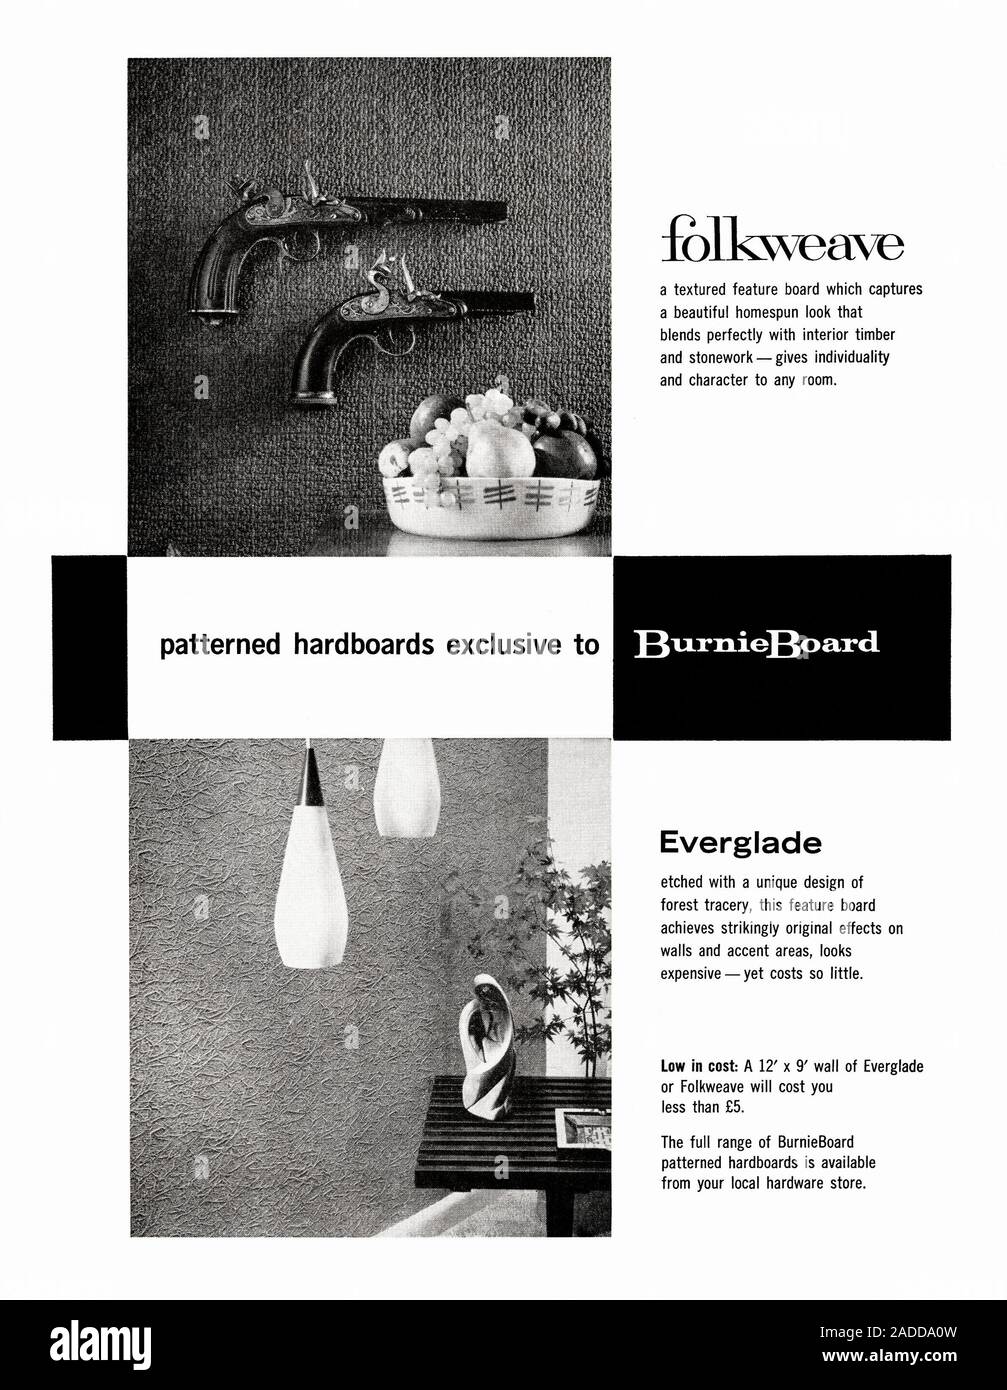 An advert for Burnie Board patterned hardboard wall panels - it appeared in an Australian magazine in 1962. The woven look is actually prefinished hardboard or masonite. The photographs show a woven pattern (Folkweave – rough cloth) and an organic (Everglade – forest vegetation) on the walls. Stock Photo